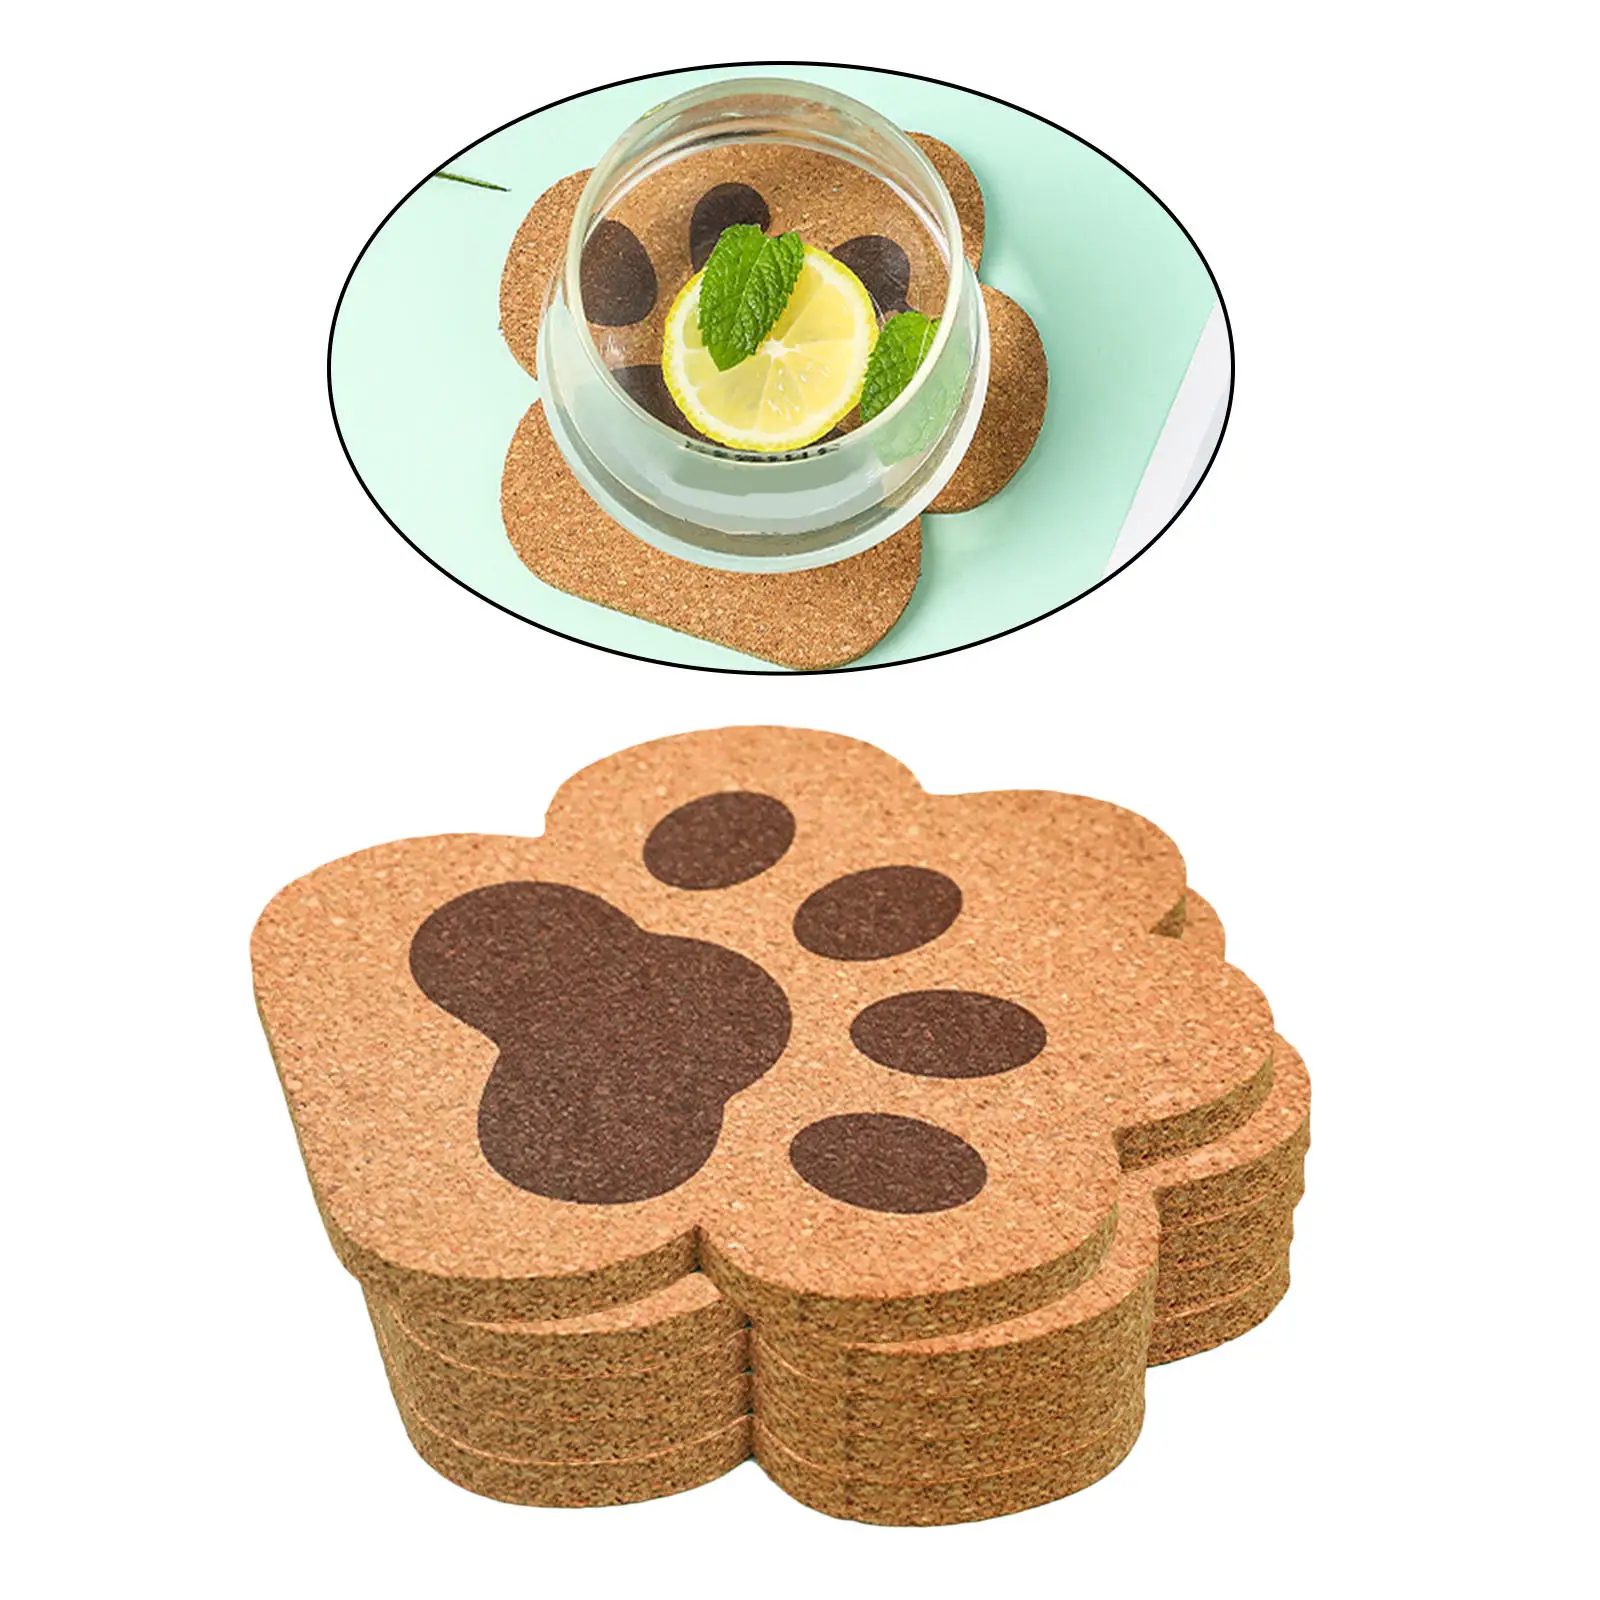 Set of 5 Cork Coaster Cat Paw 5 inch Heat Resistant Tea Mat for Home Idea Gift Wine Beer Glass